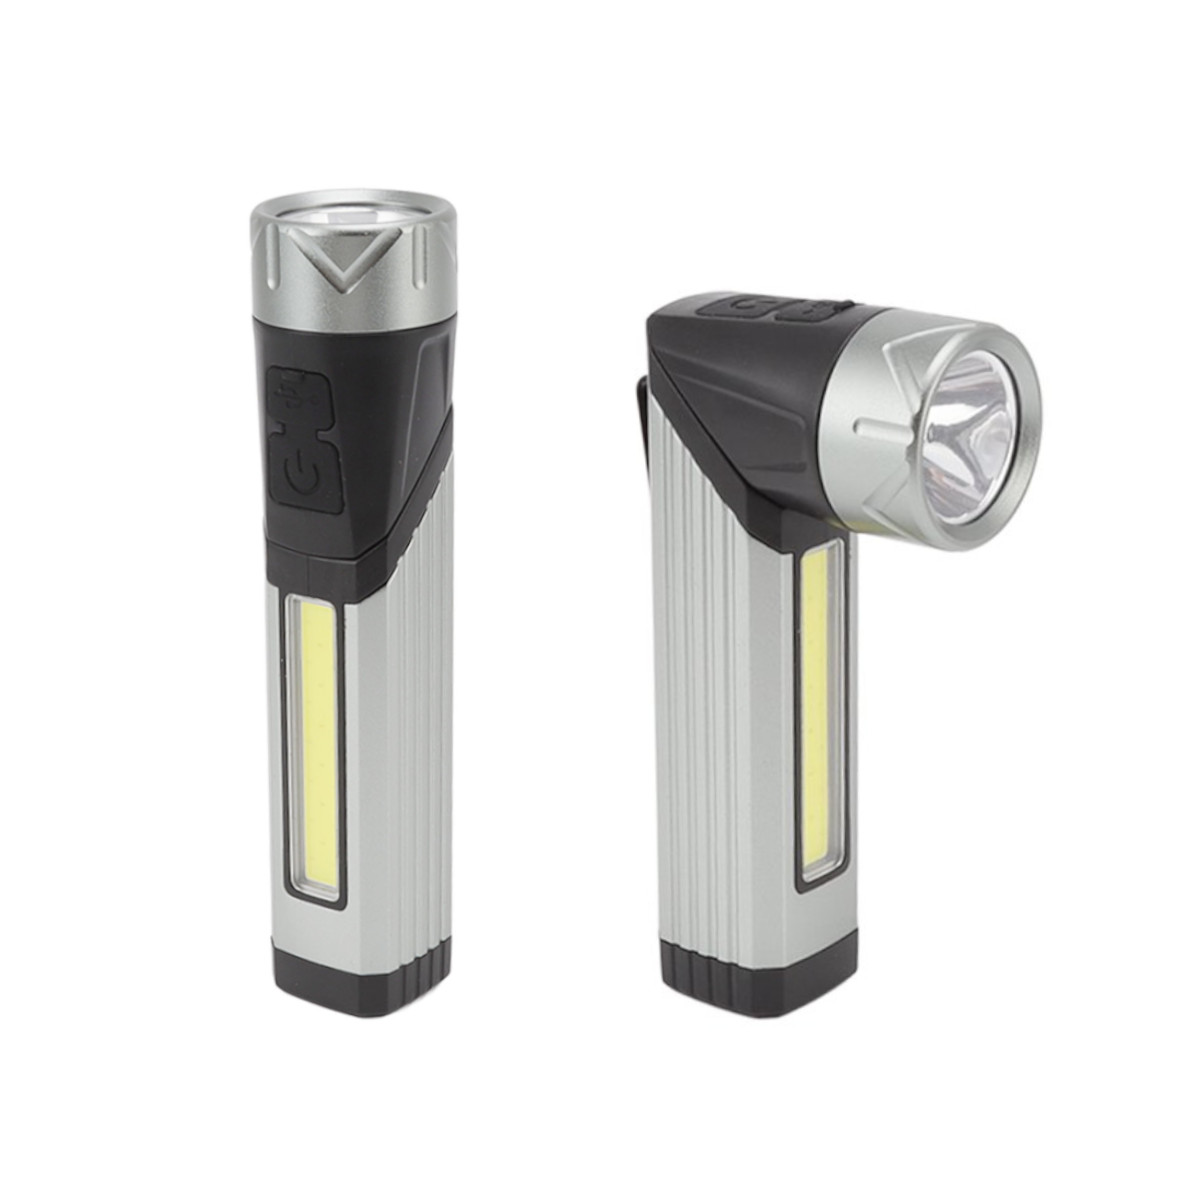 LED COB Work Light Rotatable Rechargeable Flashlight Portable 7 Gears Waterproof High Brightness for Repairing for Hiking